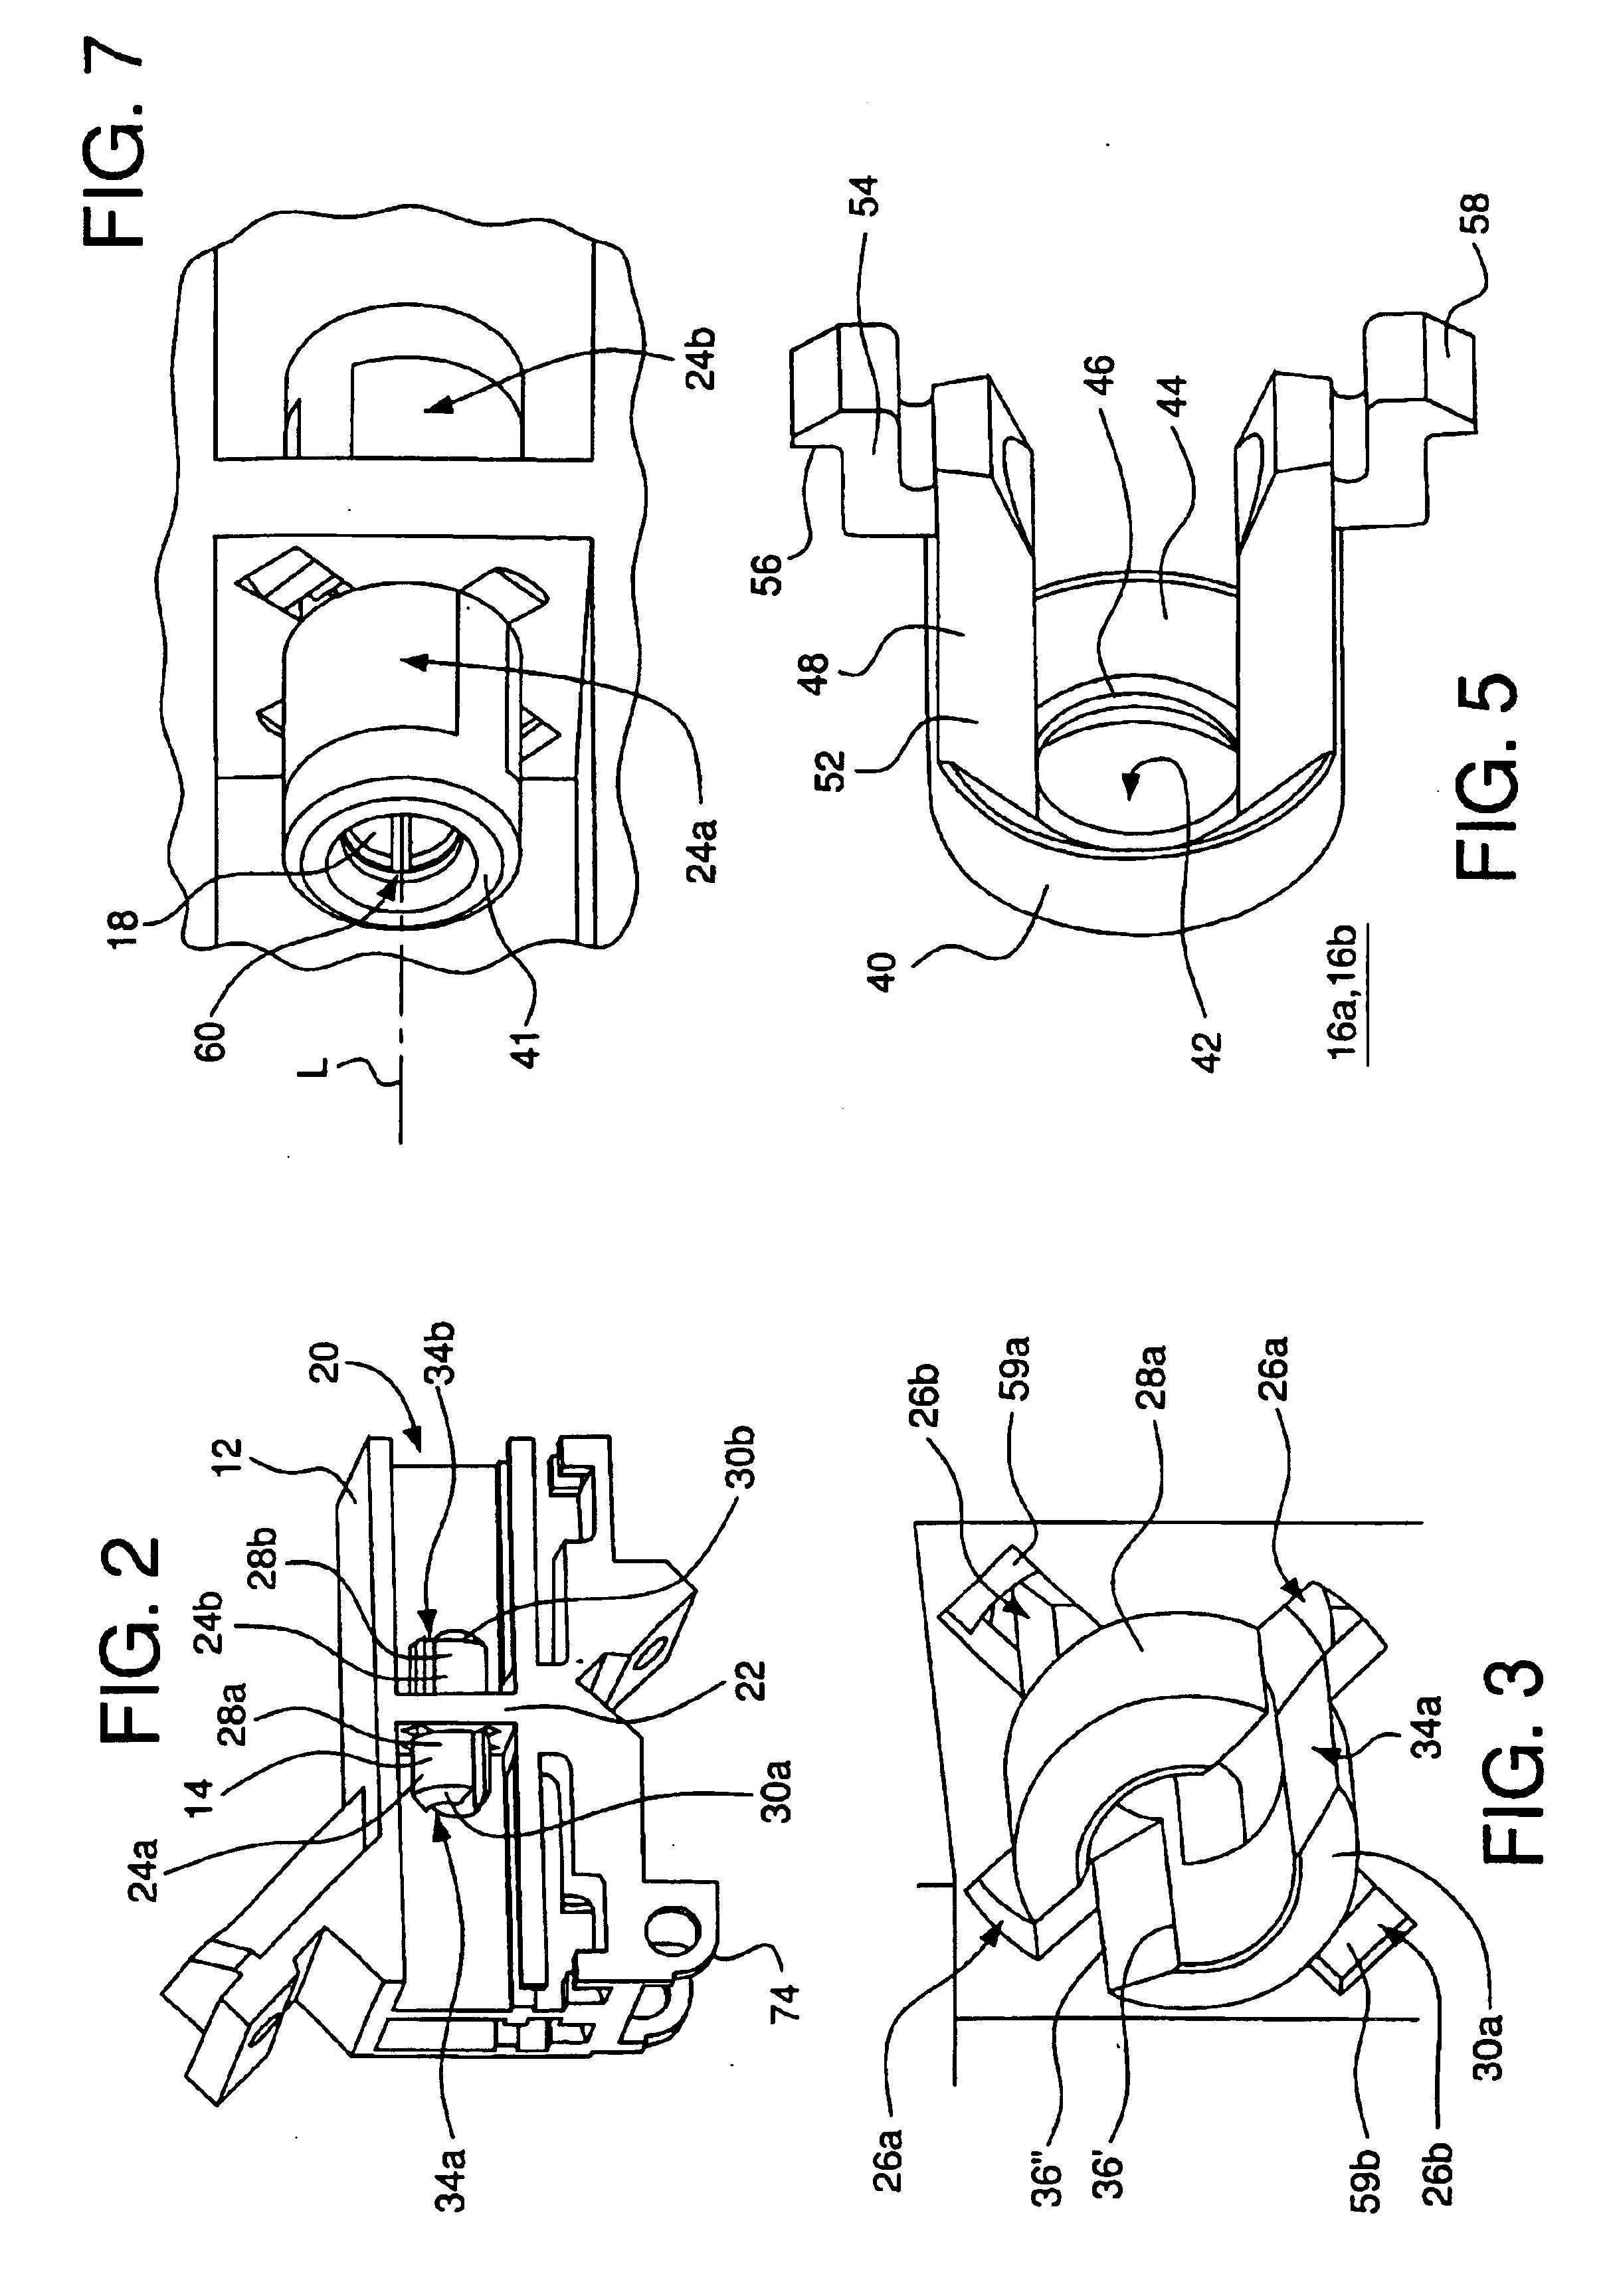 Adapter with cap for fiber optic connector